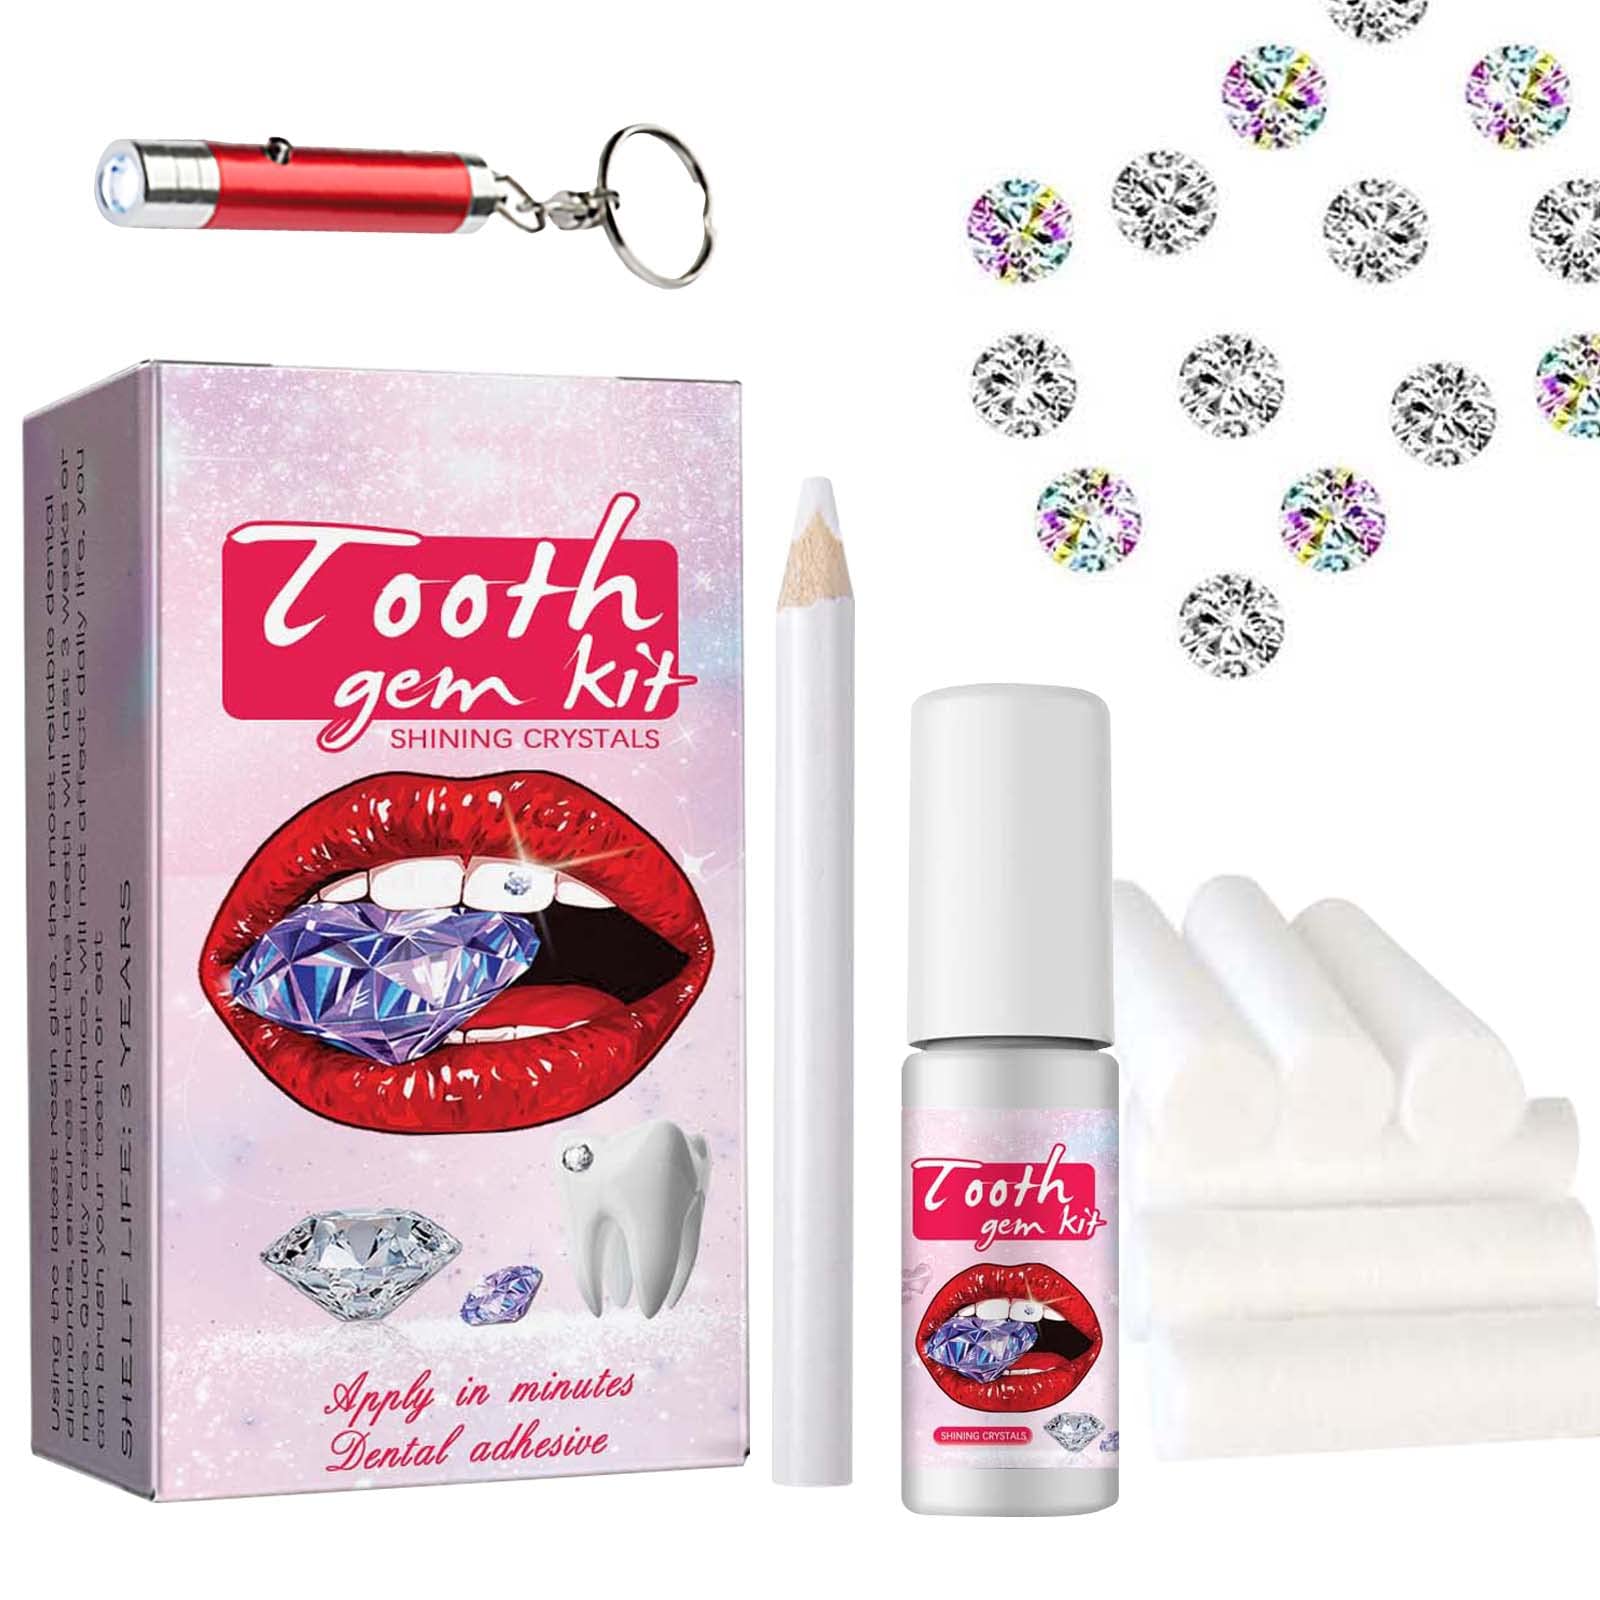 Tooth Gem Kit with Curing Light and Glue, Tooth Crystal Jewelry Starter Kit  with Glue and Crystals, Shining Smile Diy Fashionable Tooth Crystal Kit for  Starter 